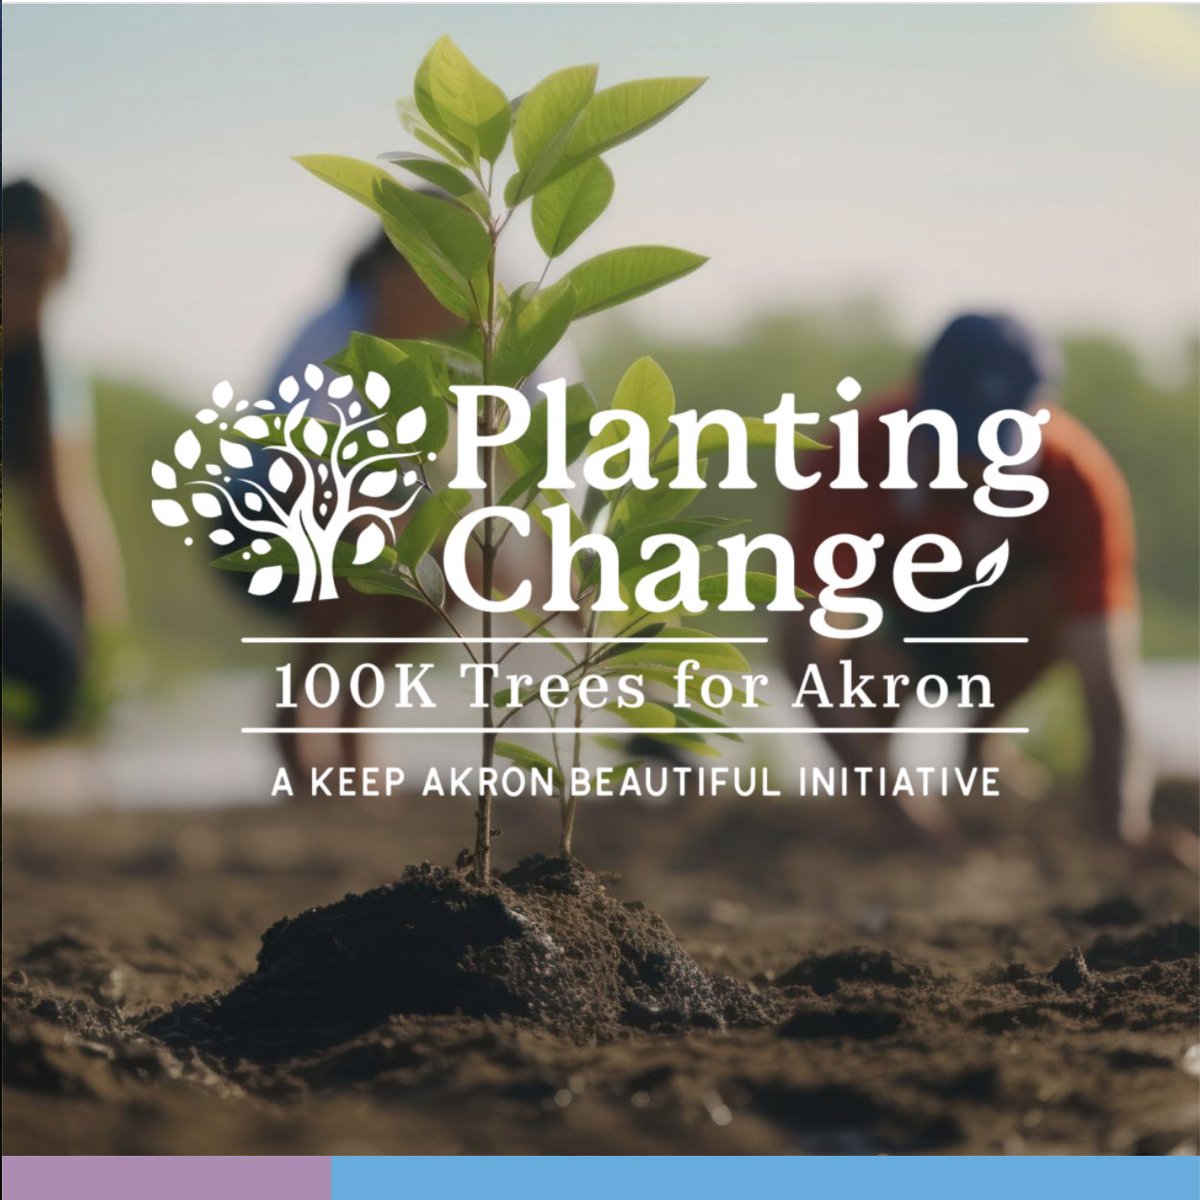 To close out #EarthMonth: Akron nonprofit launches campaign to plant 100,000 trees by 2034. @K_Akron_B #trees #nature #Sustainability #resilience #health #civicinfrastructure #publicspace #green #cities #akron keepakronbeautiful.org/planting-chang…